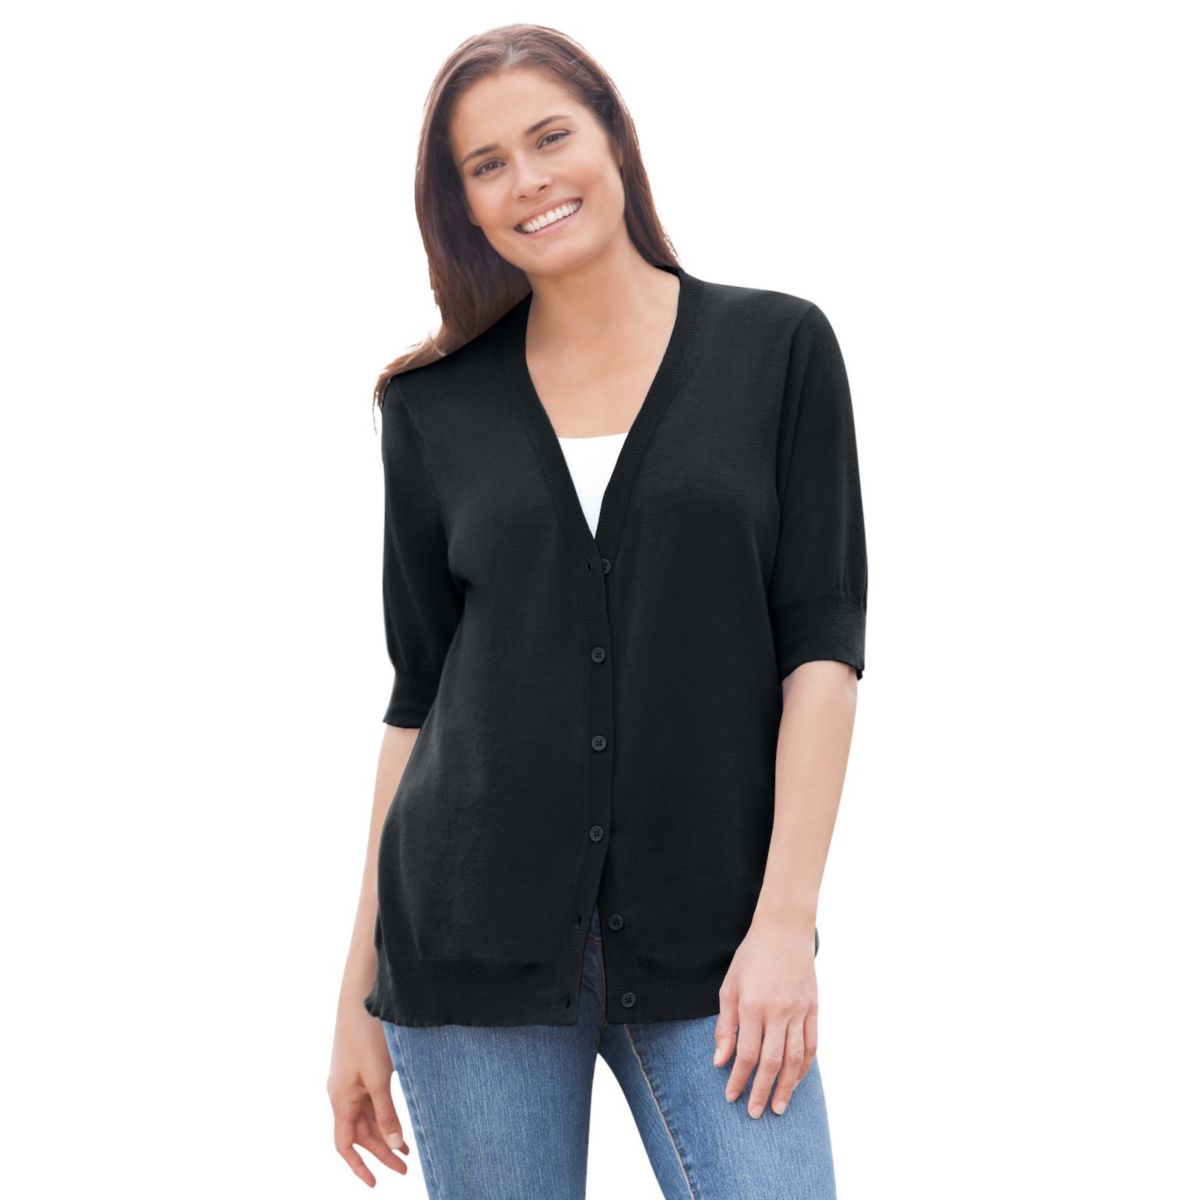 Woman Within Women's Plus Size Lightweight Short Sleeve V-neck Cardigan Woman Within